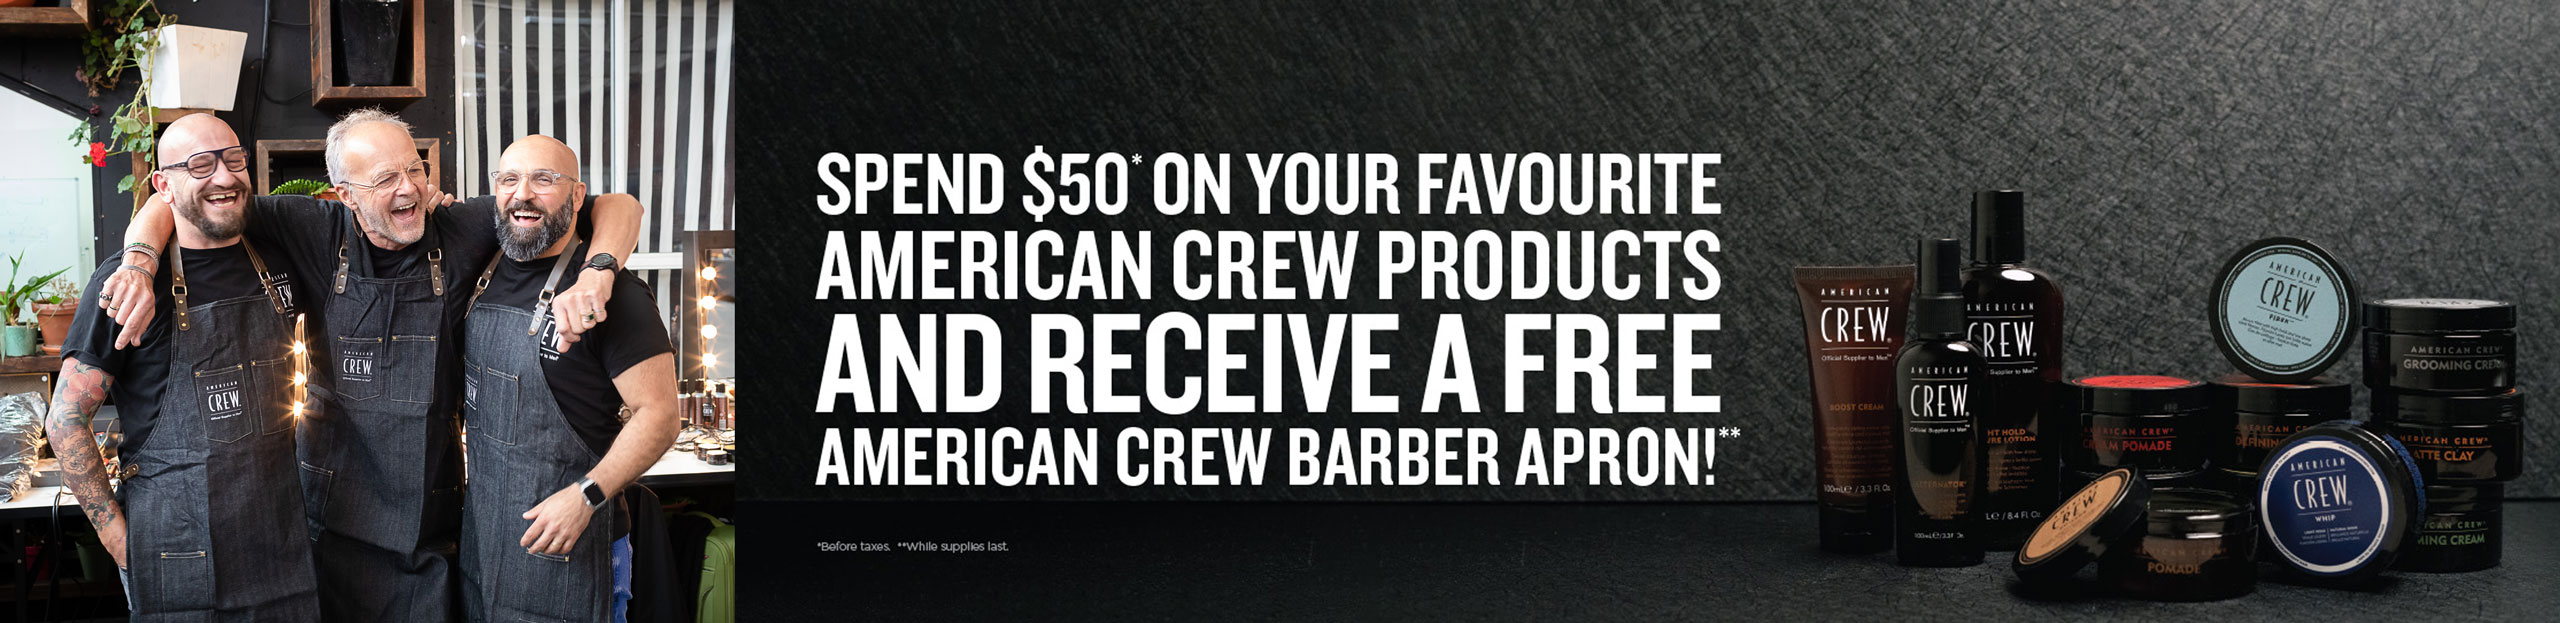 Free Apron Promotion American Crew Hair Supply Purchase